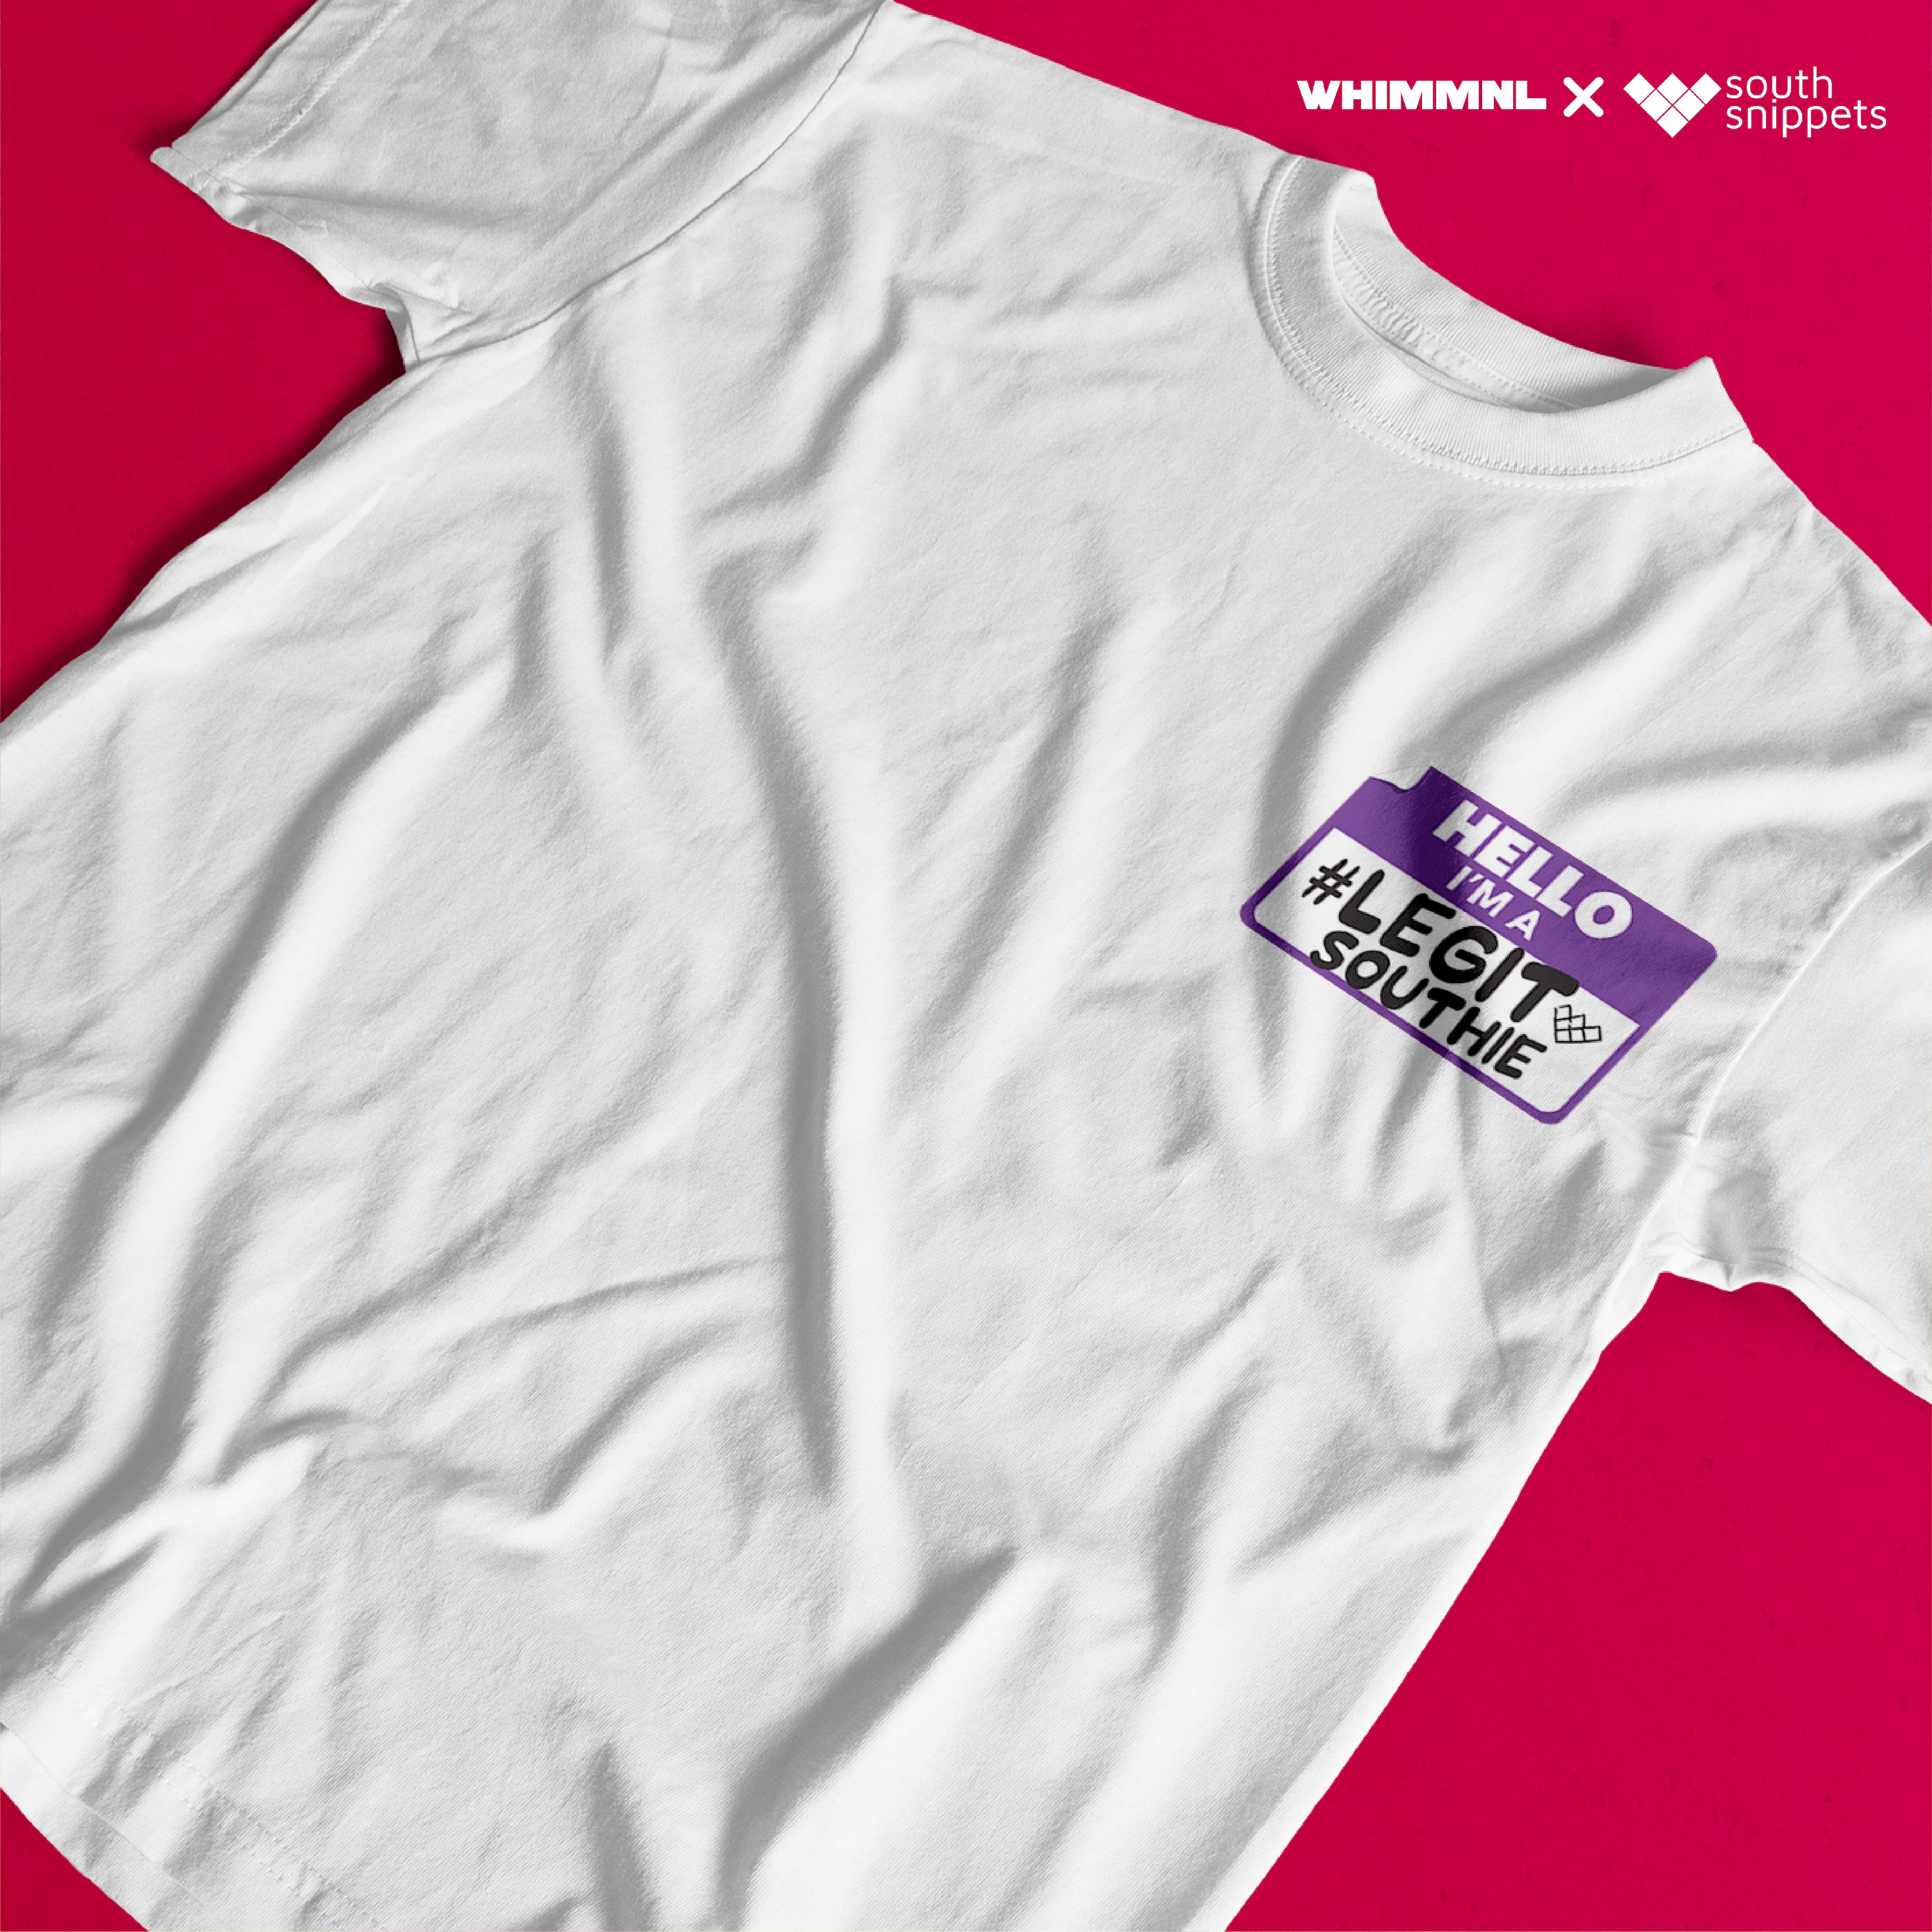 [Whim x South Snippets] #LegitSouthie Name Tag Shirt in White